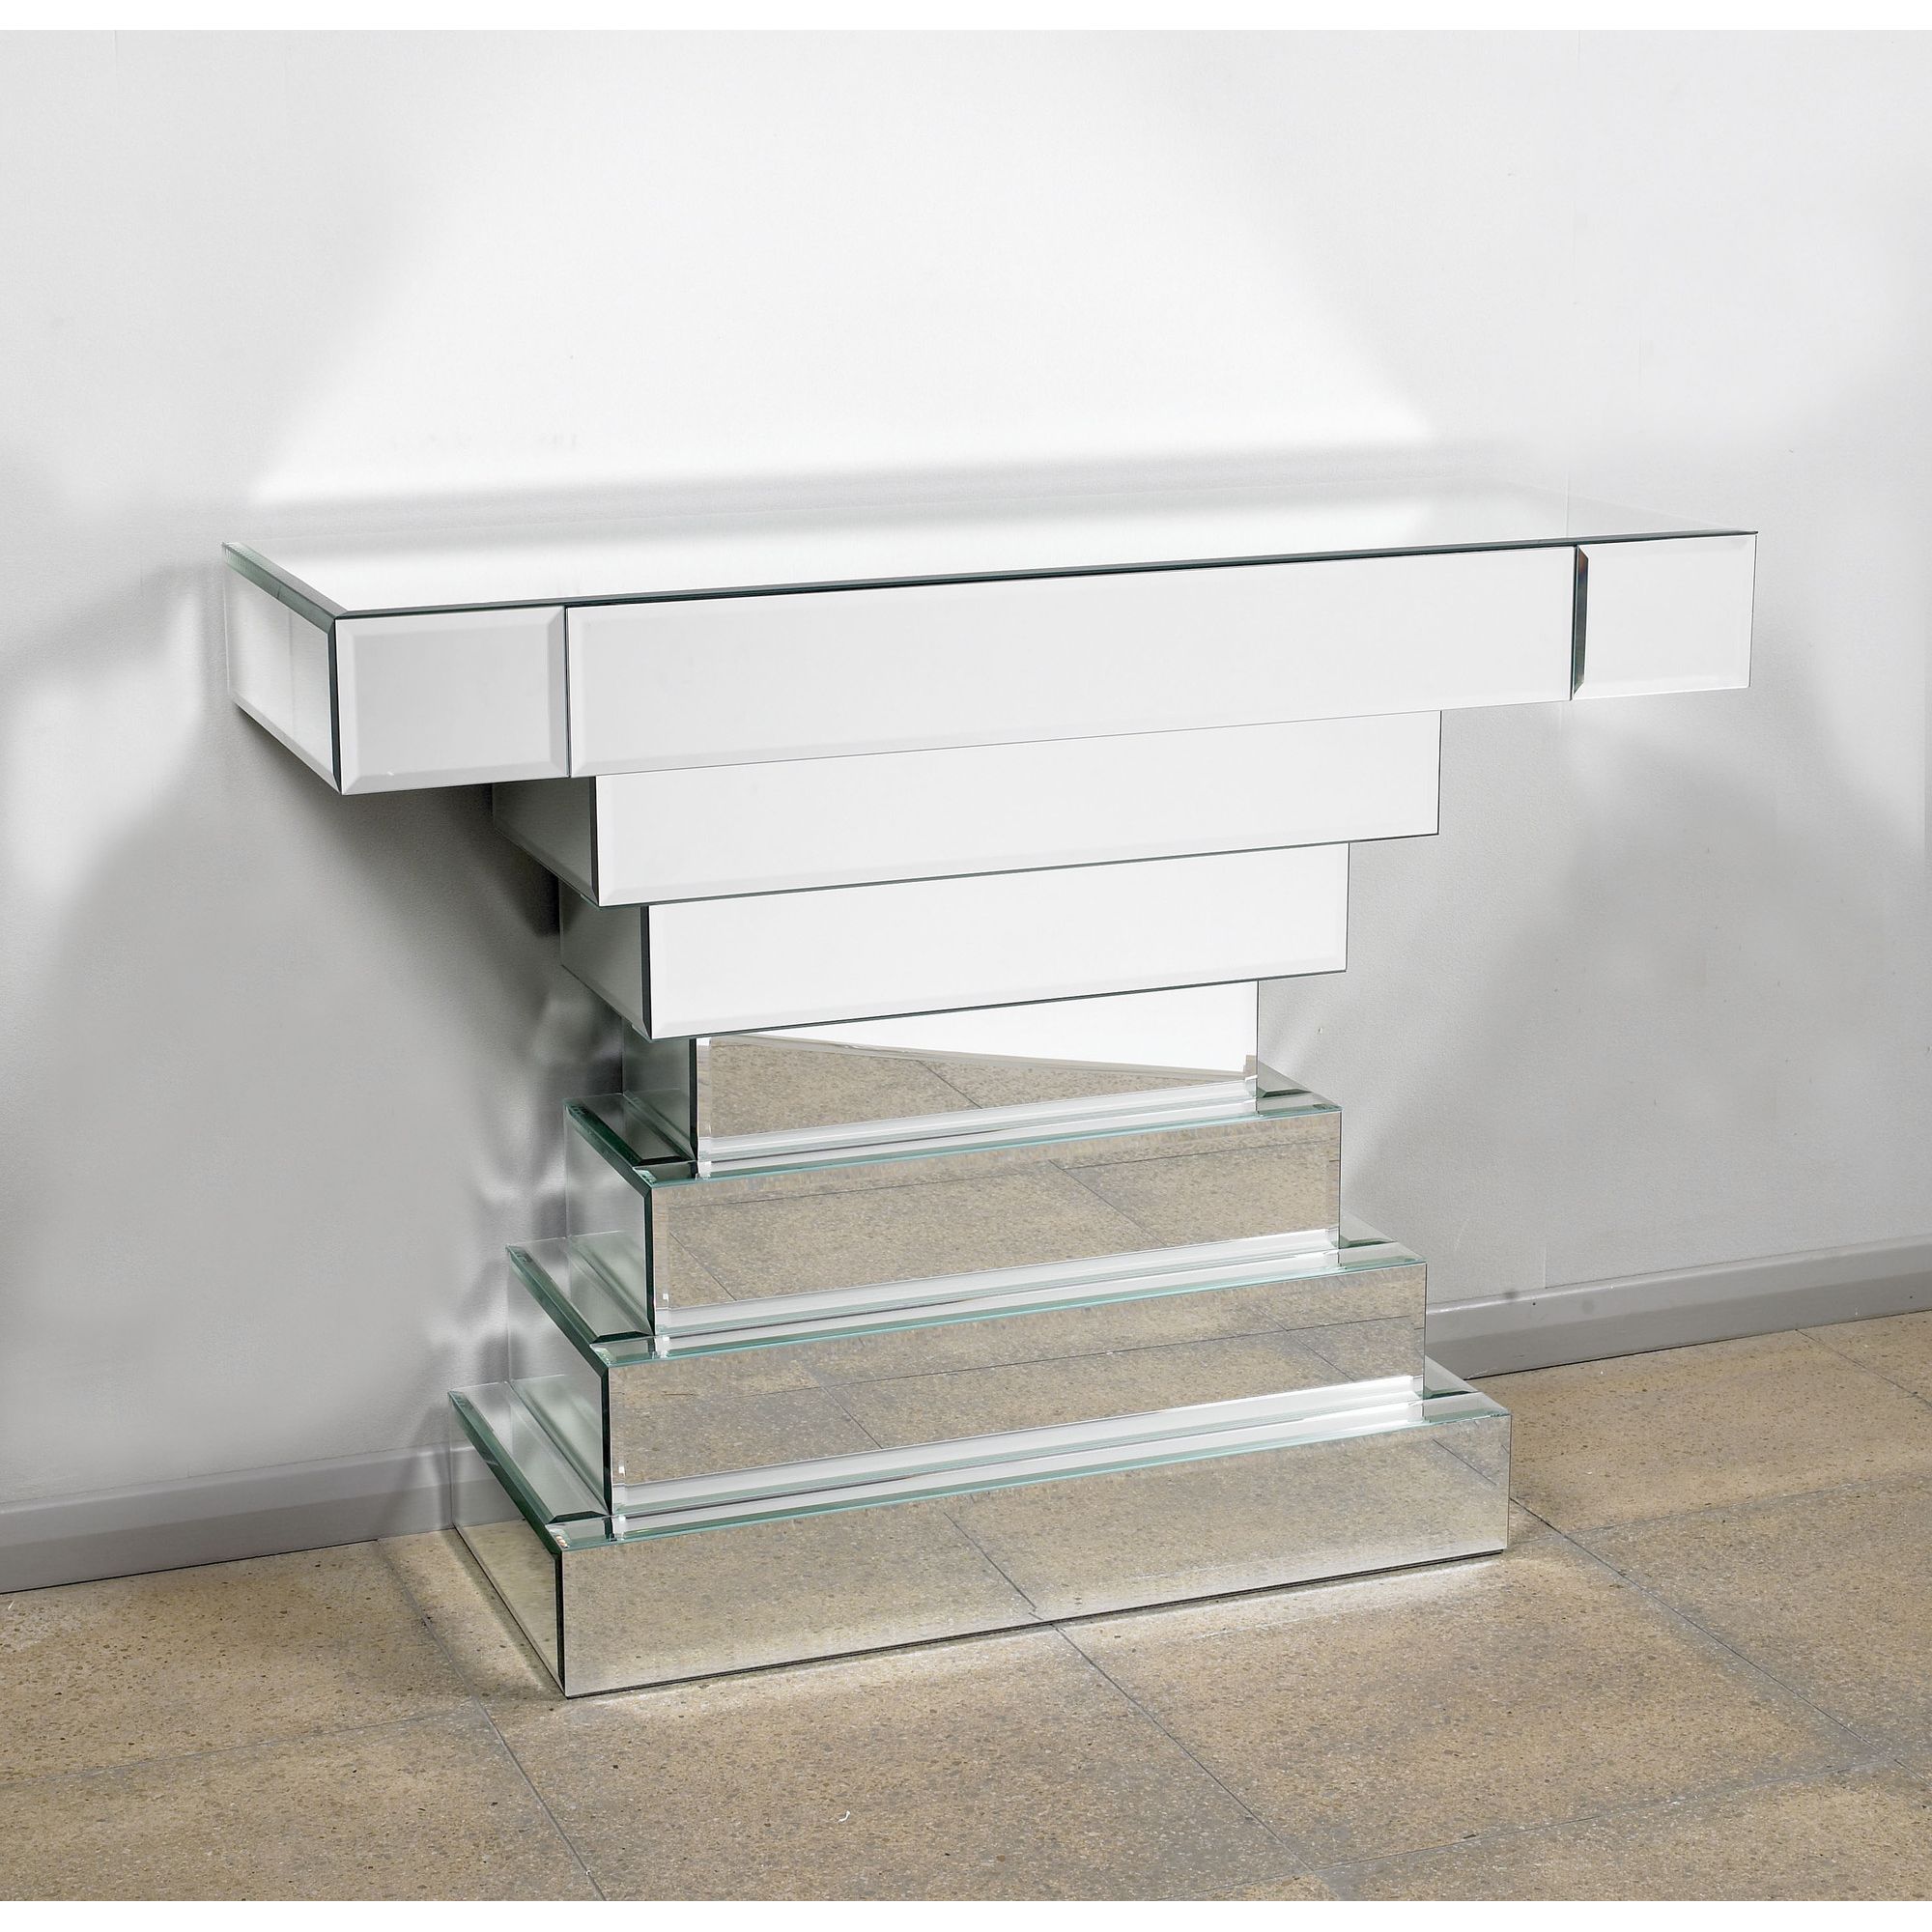 Morris Mirrors Ltd One Drawer Console Table in Silver at Tesco Direct